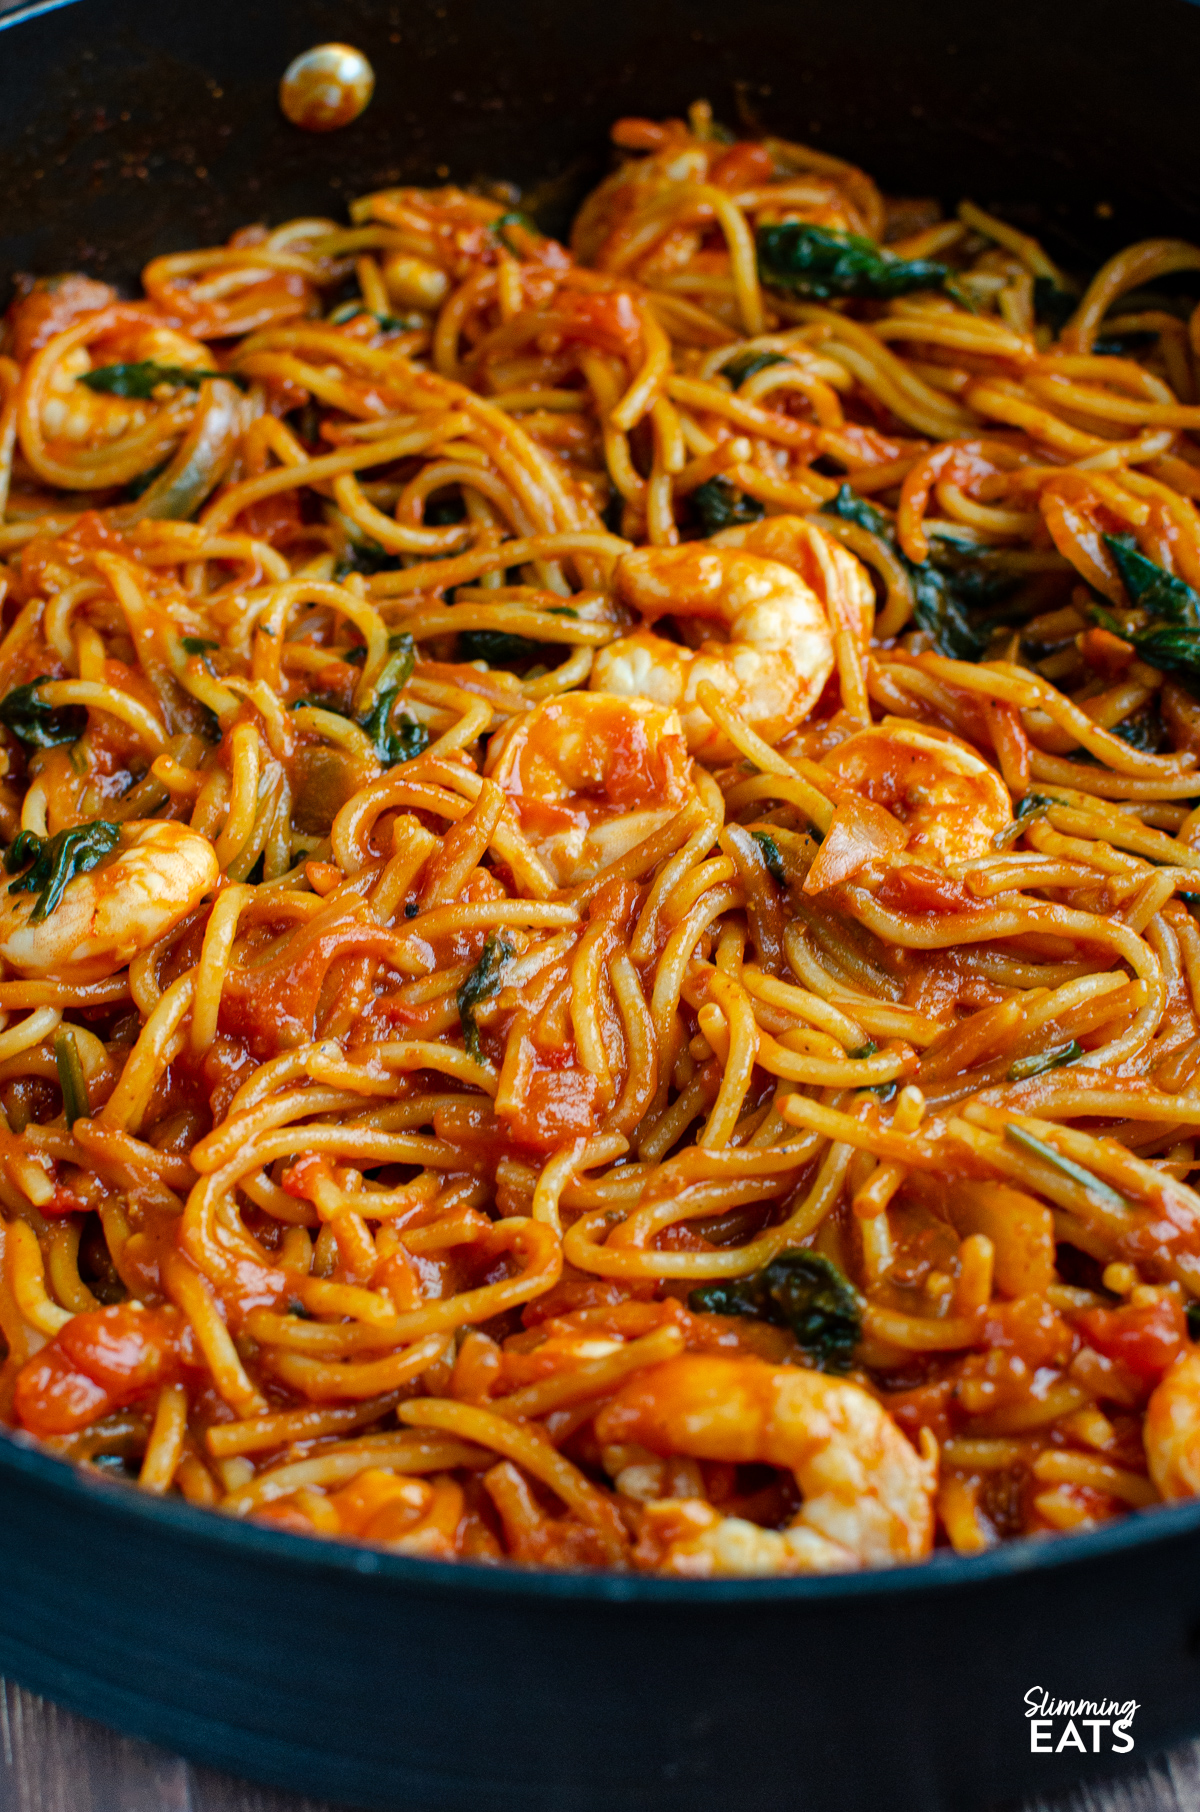 
Shrimp and spinach tomato pasta simmering in a non-stick deep frying pan, ready to be served up fresh and flavorful.